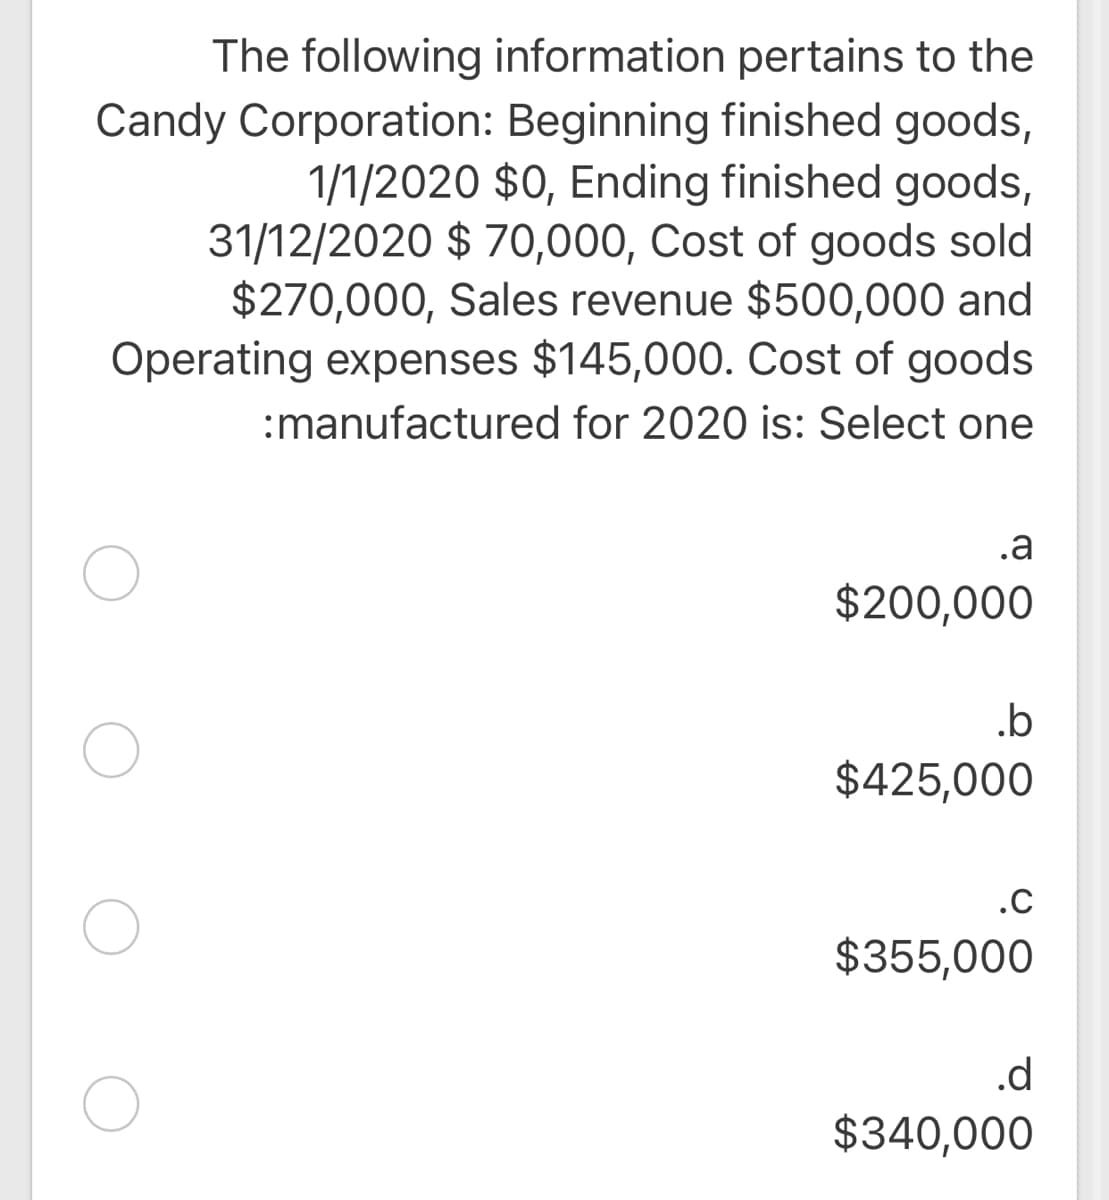 The following information pertains to the
Candy Corporation: Beginning finished goods,
1/1/2020 $0, Ending finished goods,
31/12/2020 $ 70,000, Cost of goods sold
$270,000, Sales revenue $500,000 and
Operating expenses $145,000. Cost of goods
:manufactured for 2020 is: Select one
.a
$200,000
.b
$425,000
.C
$355,000
.d
$340,000
